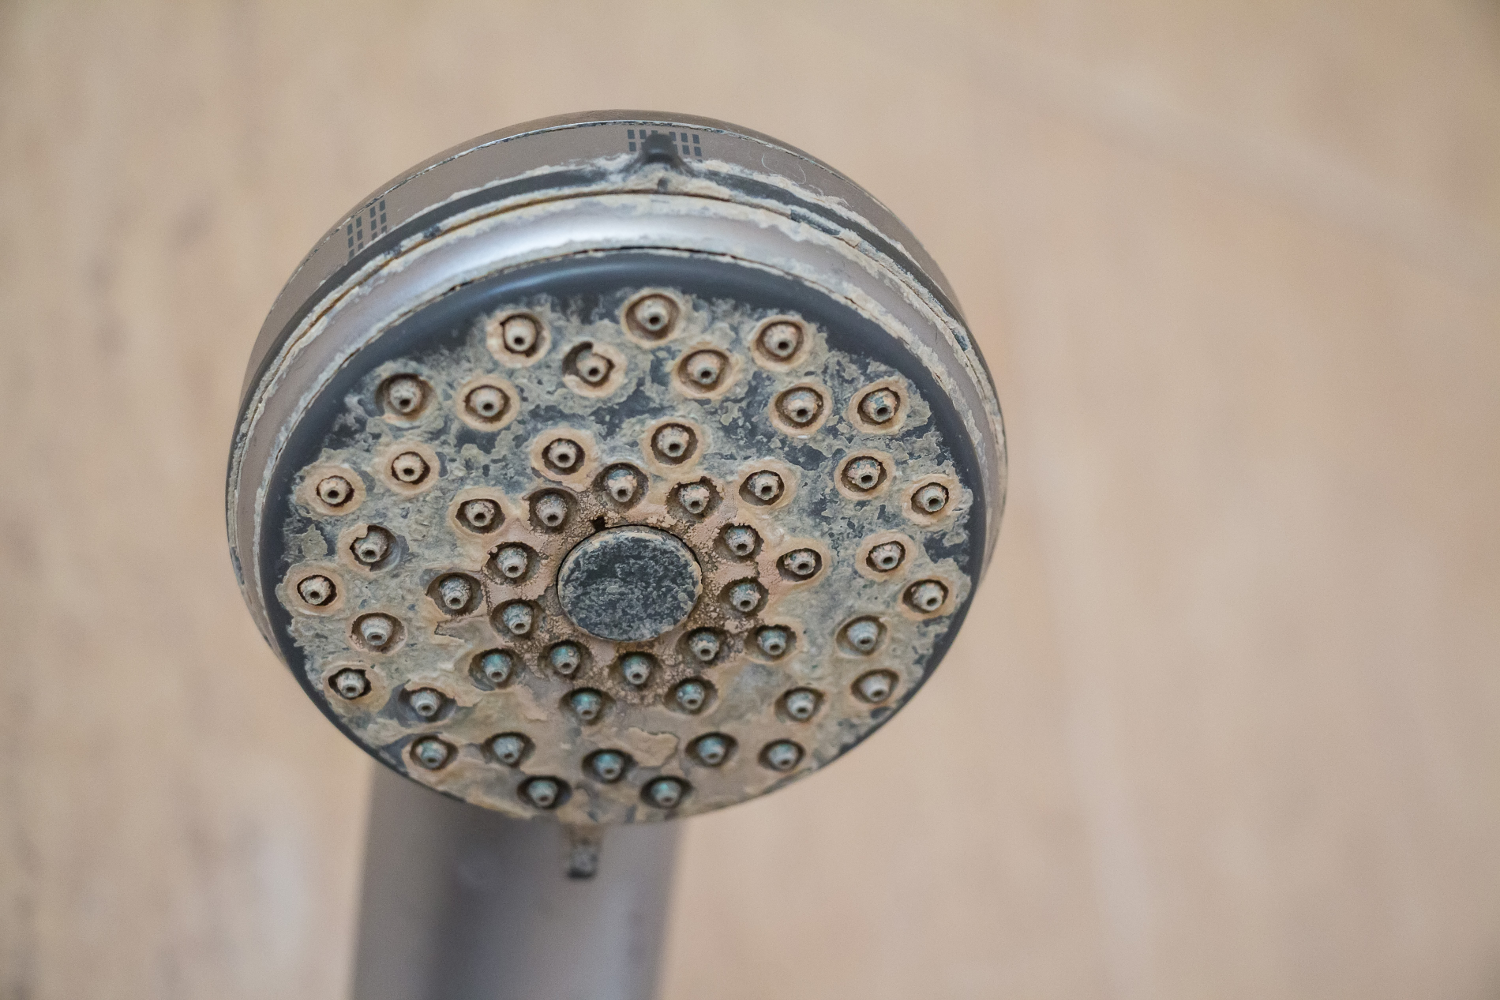 Long Island’s Hard Water Problem and the Need for Water Softening Systems